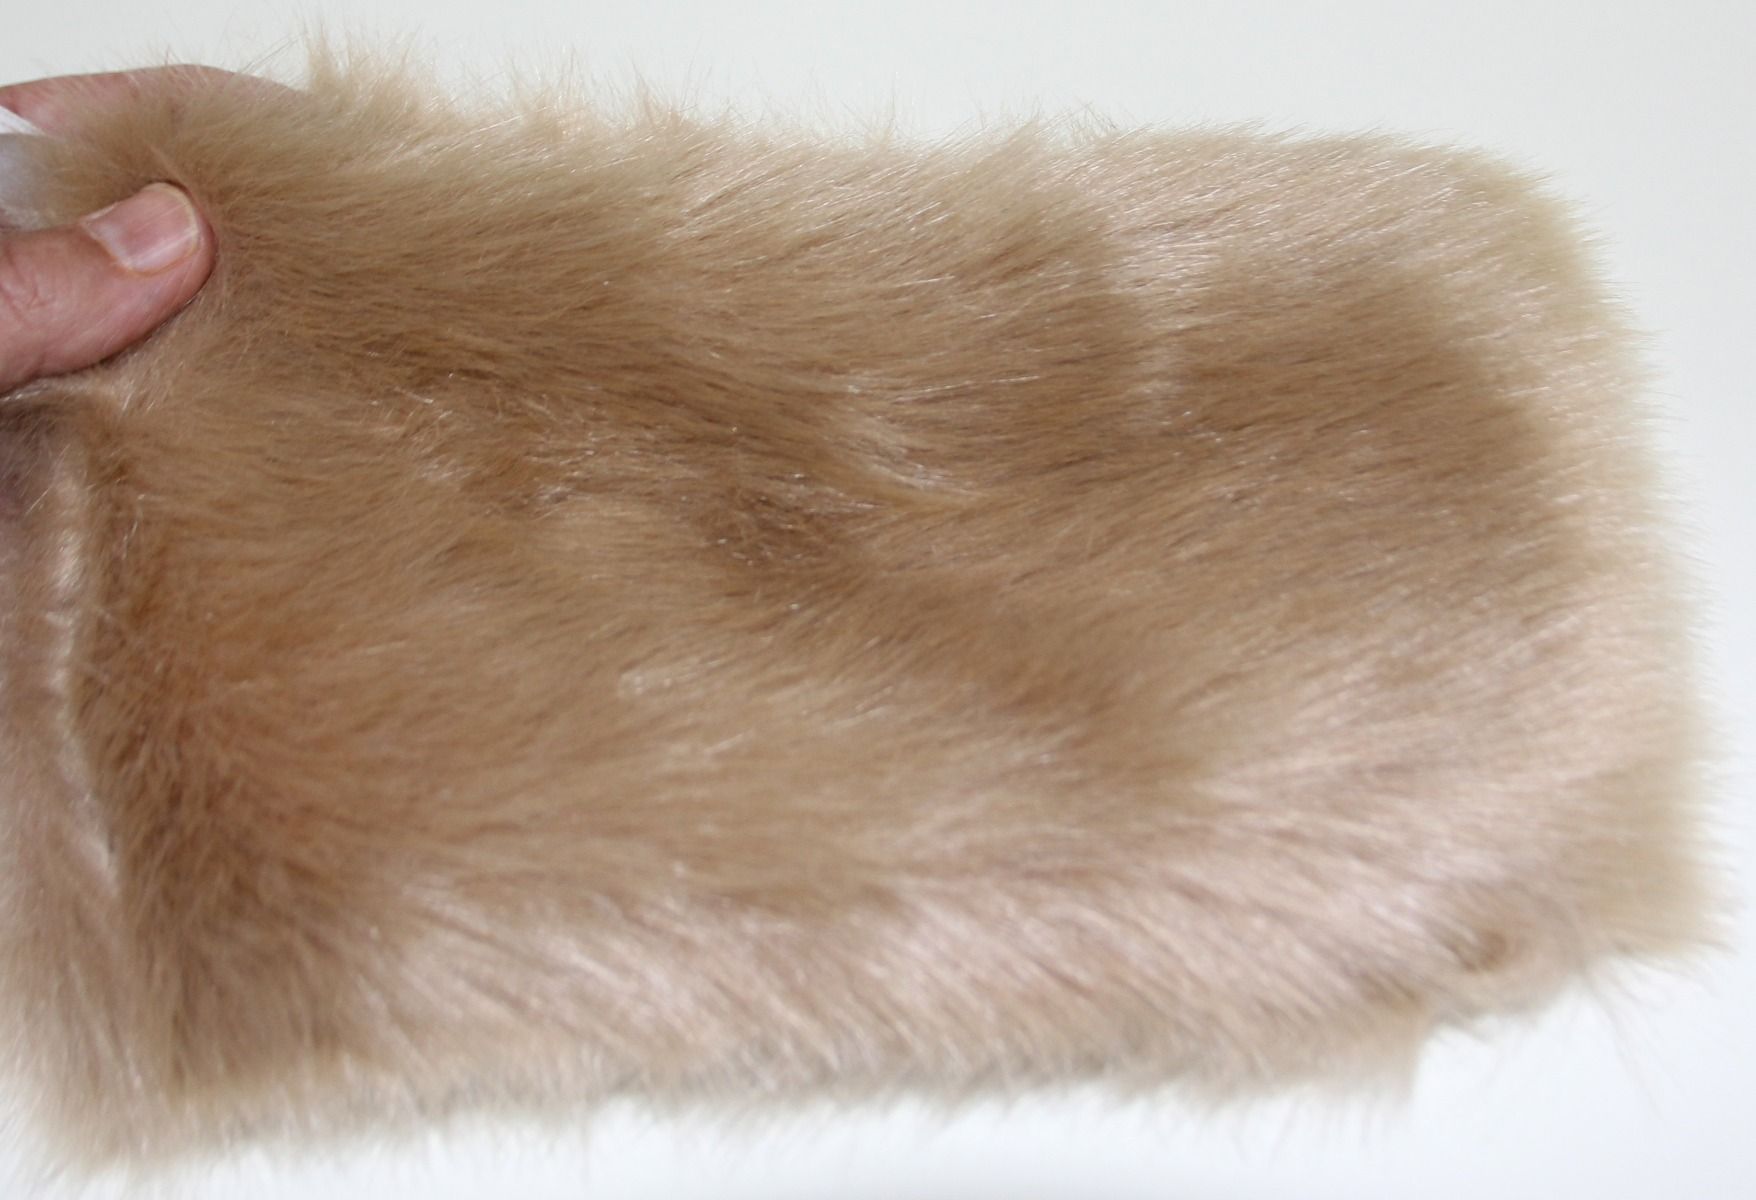 Animal Skins & Hides For Learning: Small Mammal Animal Skin, Hide & Pelt  Products